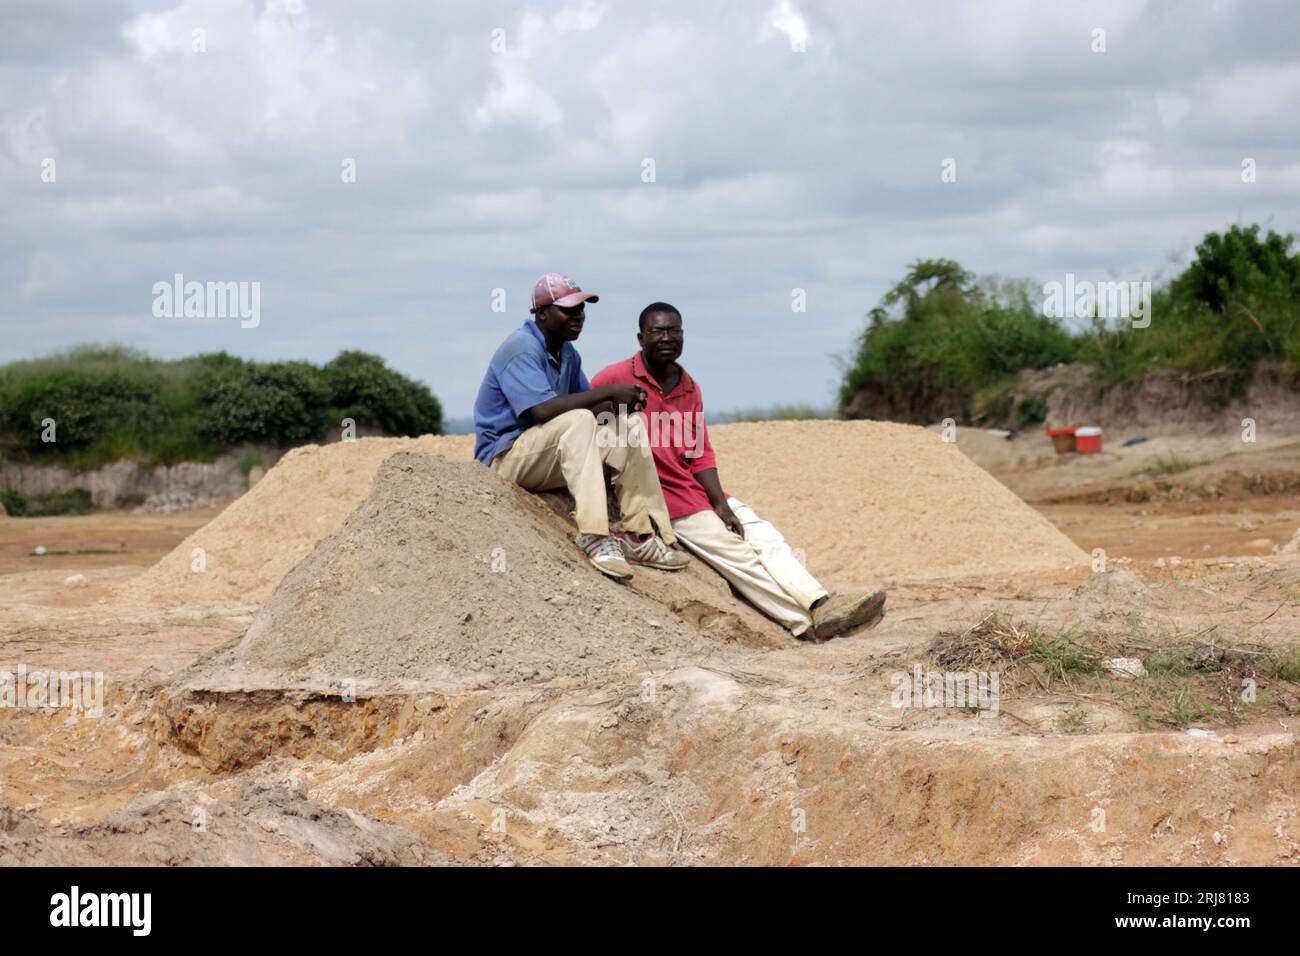 Two men are sitting on top of a mound of sand as they rest from digging for sand. Sand mining is illegal in most parts of the country. Harare, Zimbabwe. Stock Photo